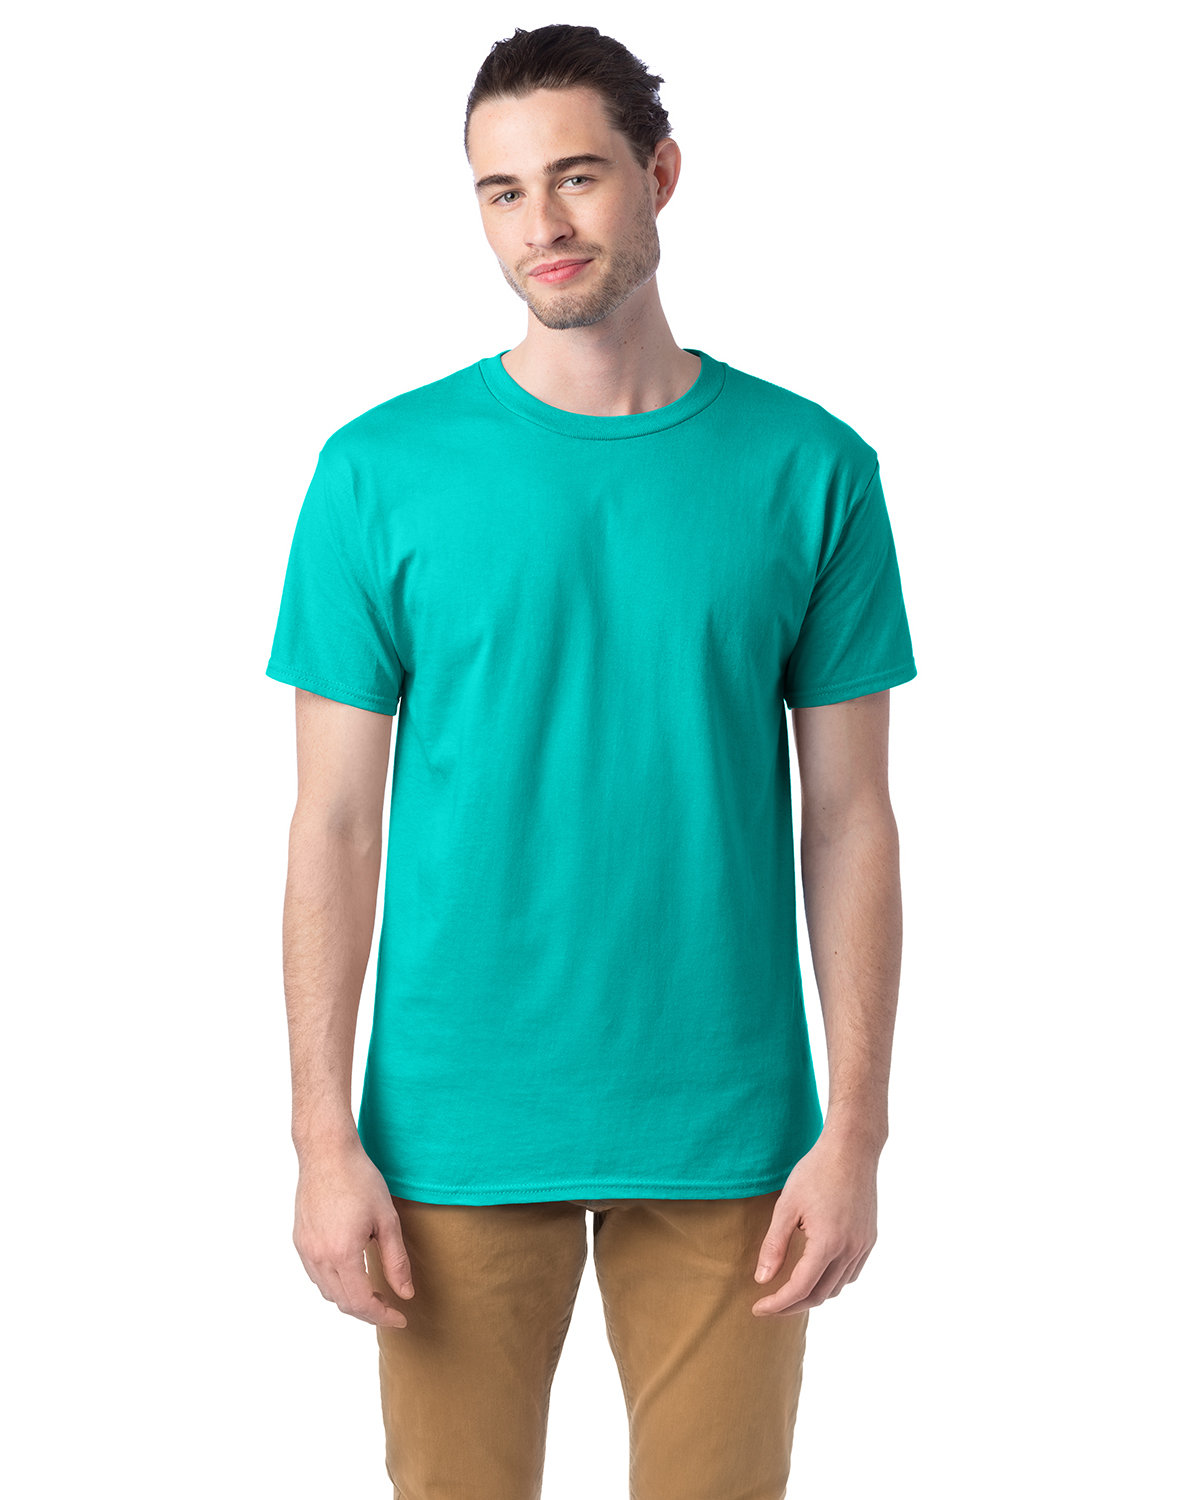 Hanes Adult Essential-T T-Shirt ATHLETIC TEAL 